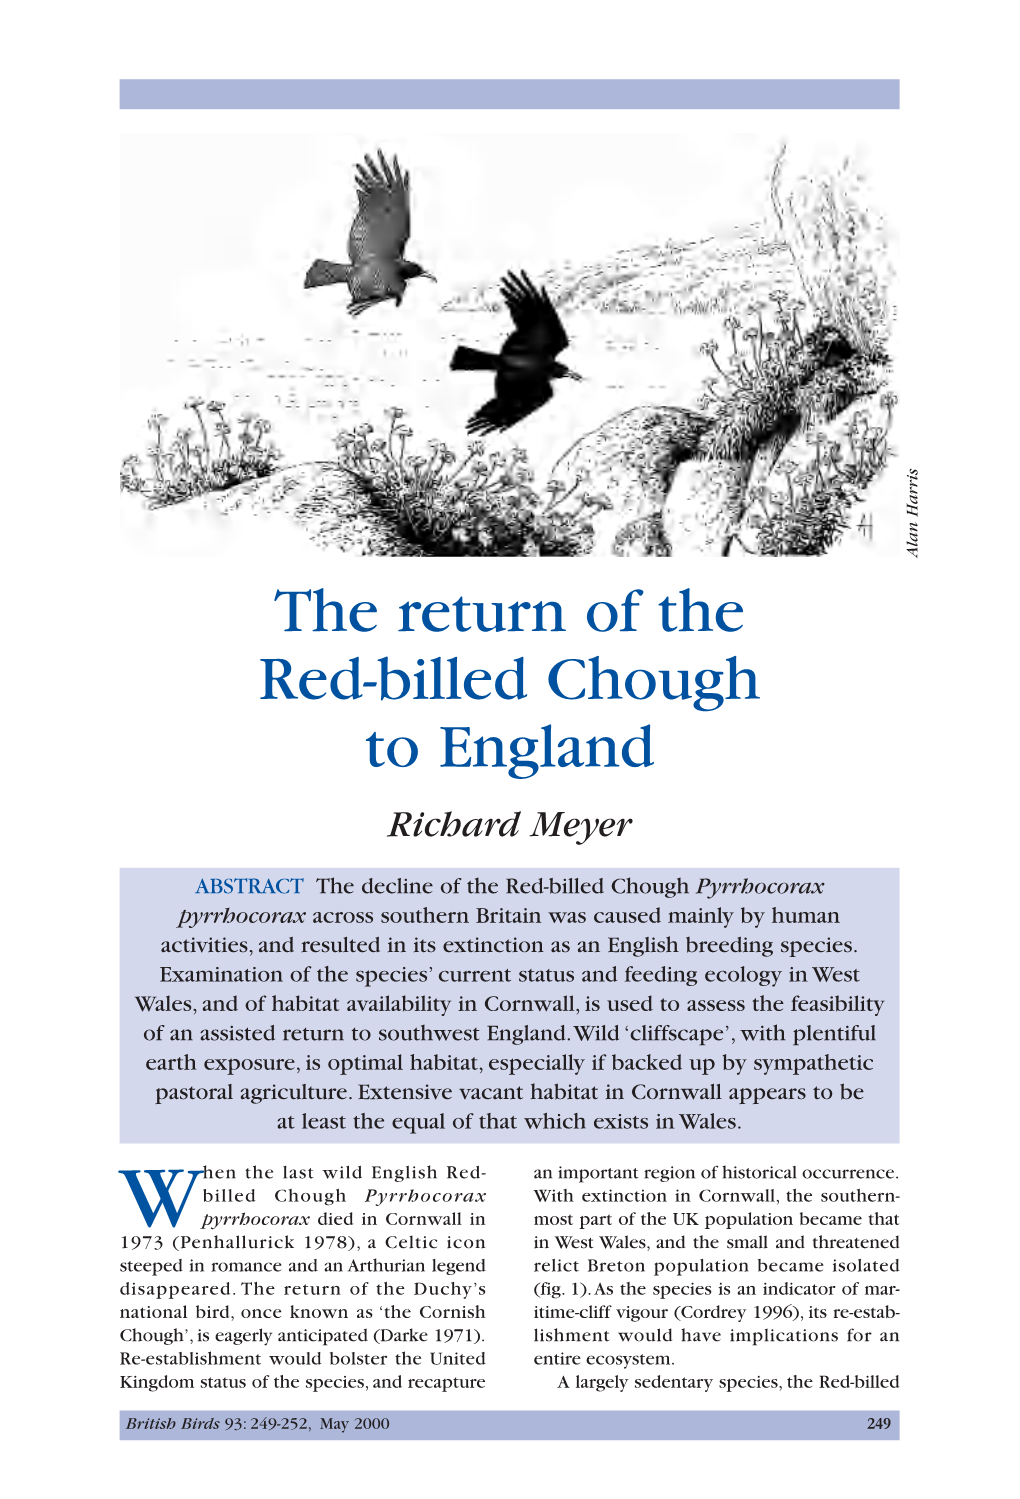 The Return of the Red-Billed Chough to England Richard Meyer